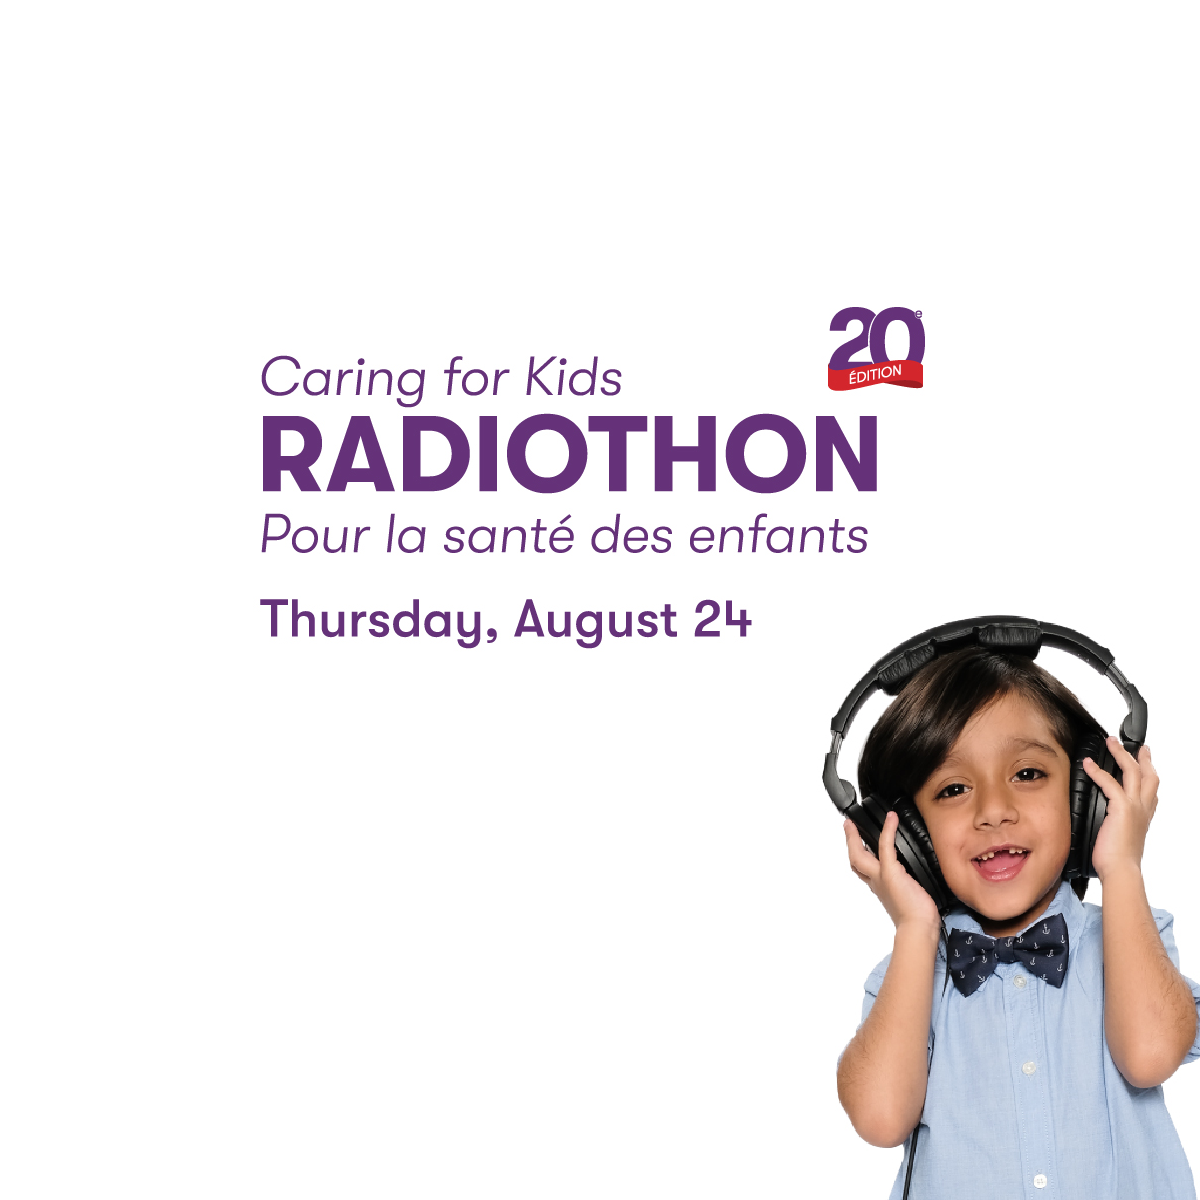 Caring for Kids Radiothon: 14 year old Francesca lives with a rare condition, Pallister Killian Syndrome